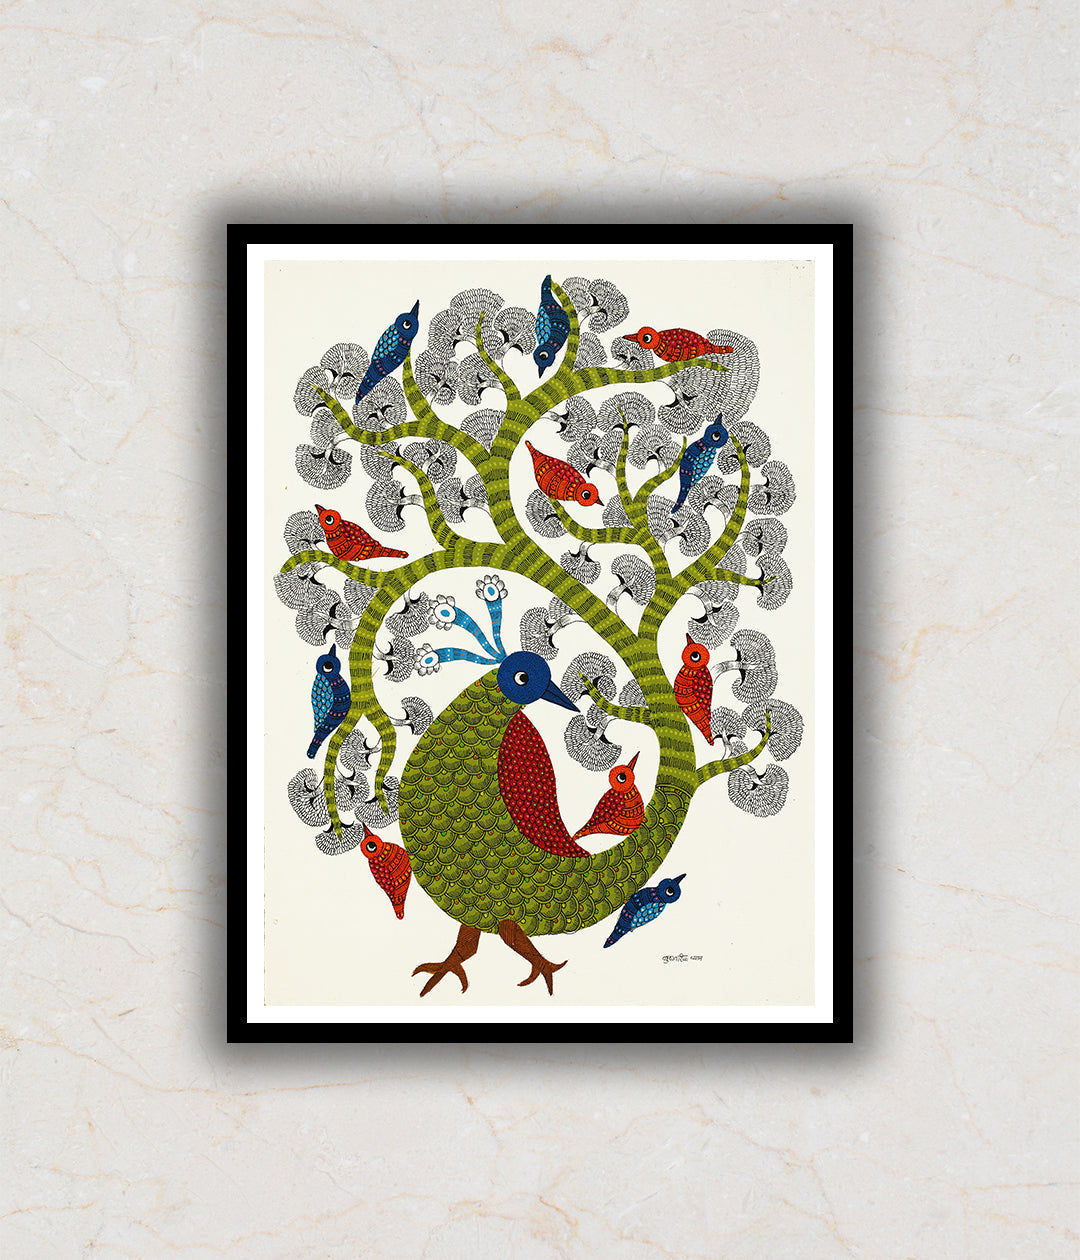 The Home of Feathers Gond Art Painting For Home Wall Art Decor